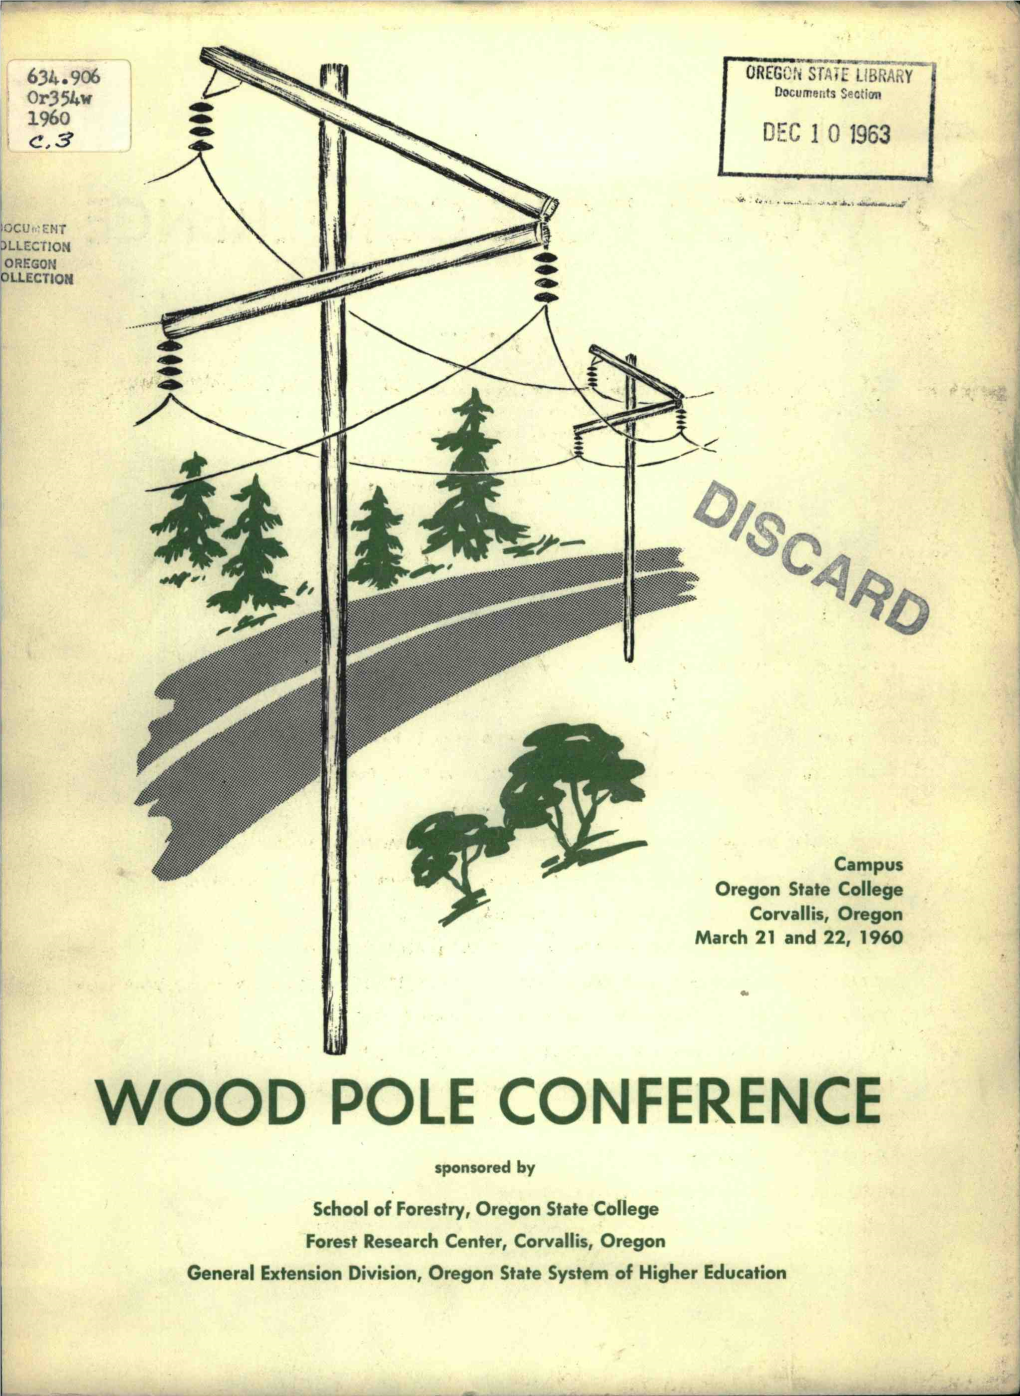 Wood Pole Conference